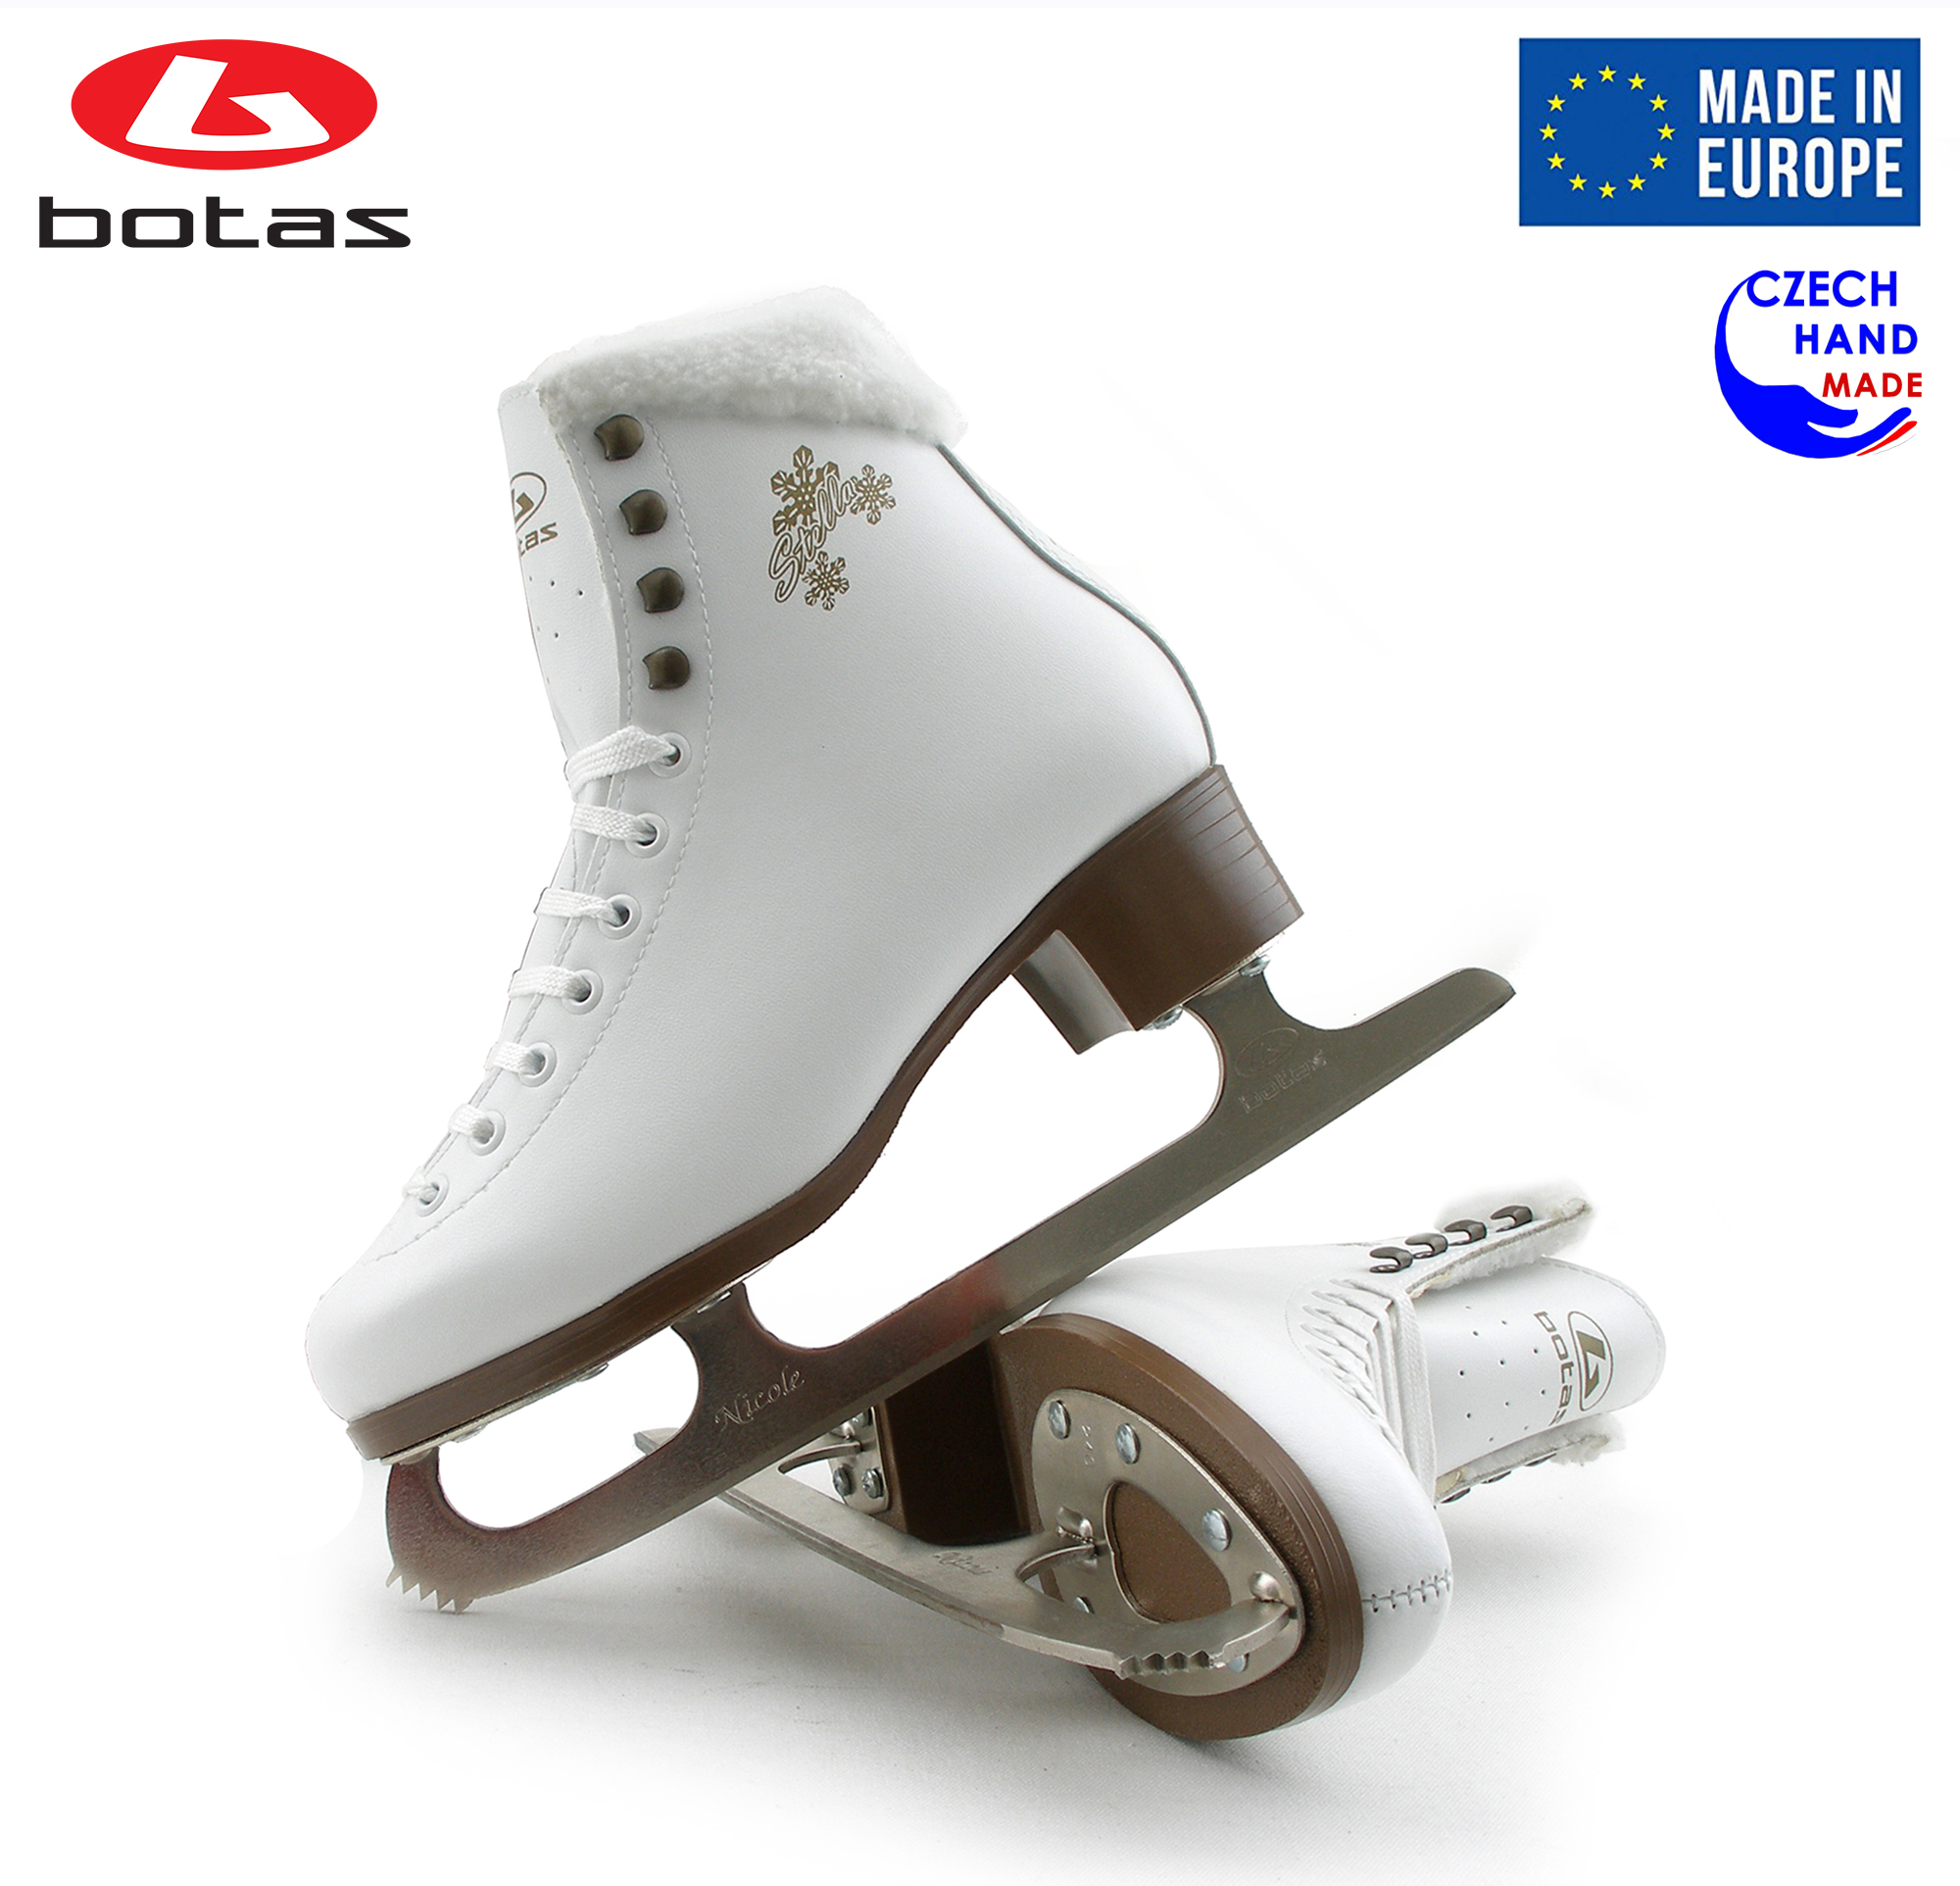 BOTAS - model: STELLA / Made in Europe (Czech Republic) / Innovated Elegant Figure Ice Skates for Girls, Kids / with Plush Collar / NICOLE blades / Color: White, Size: Kids 10 - image 3 of 6